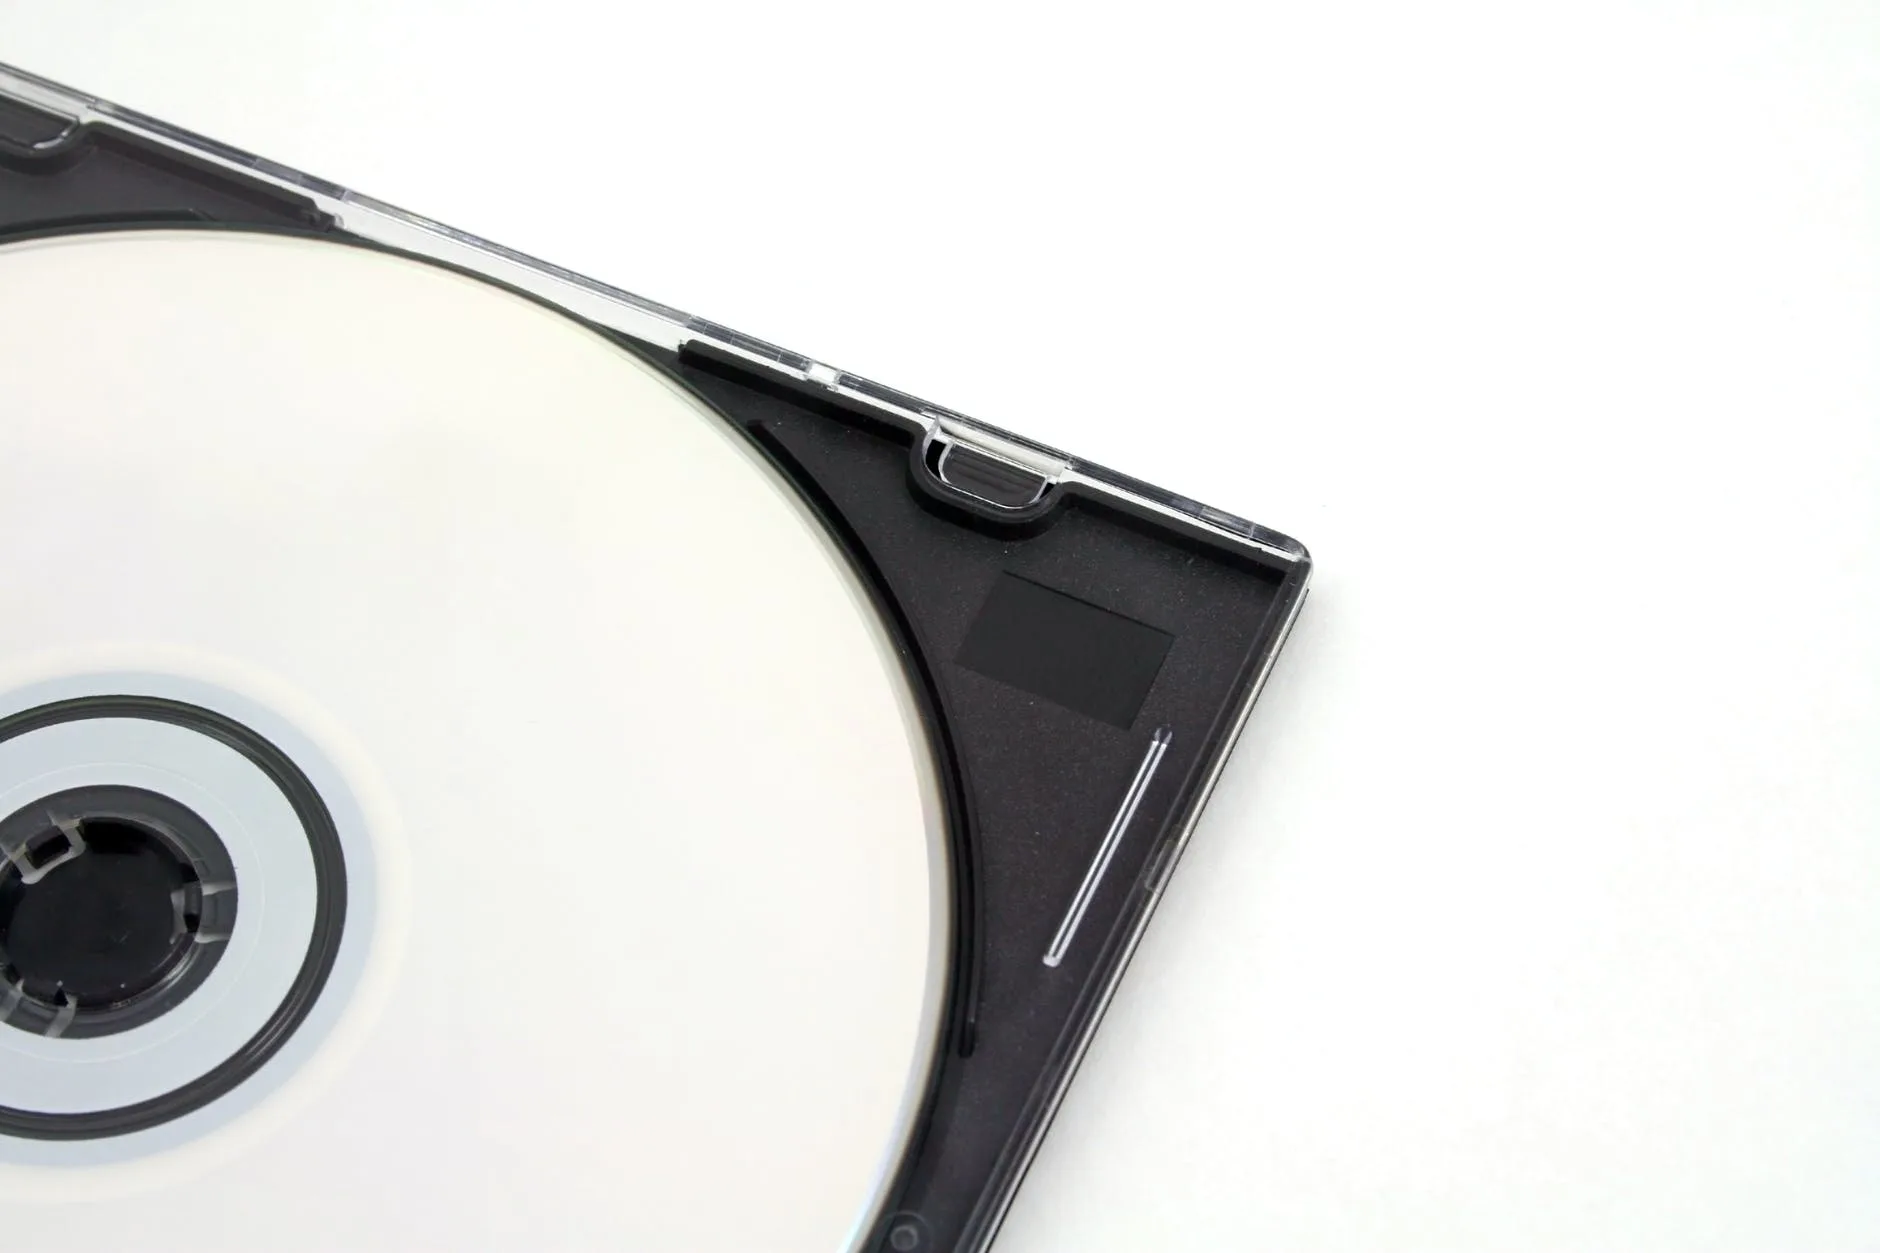 A case with a cd inside